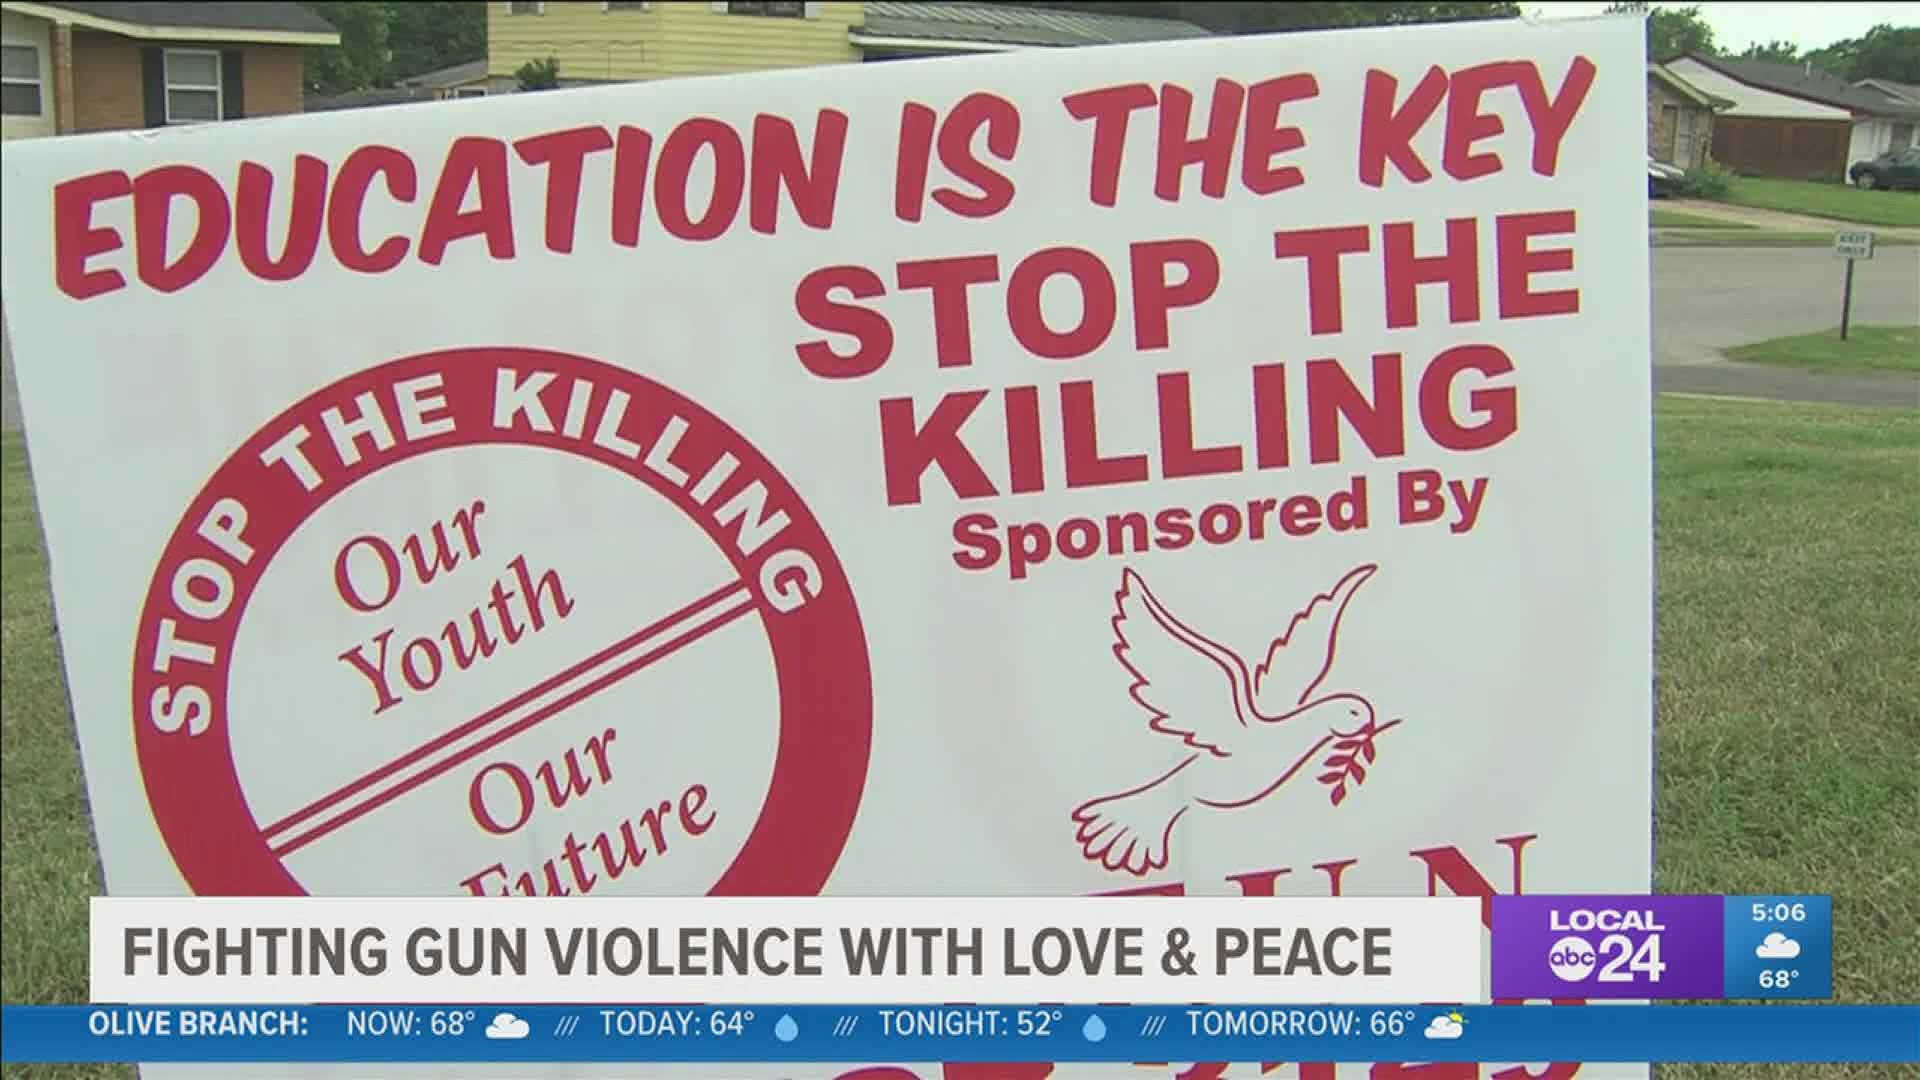 The Love and Peace event will be Saturday from 9:00 a.m. to 2:00 p.m. at Mount Vernon Baptist Church on Parkrose Road.